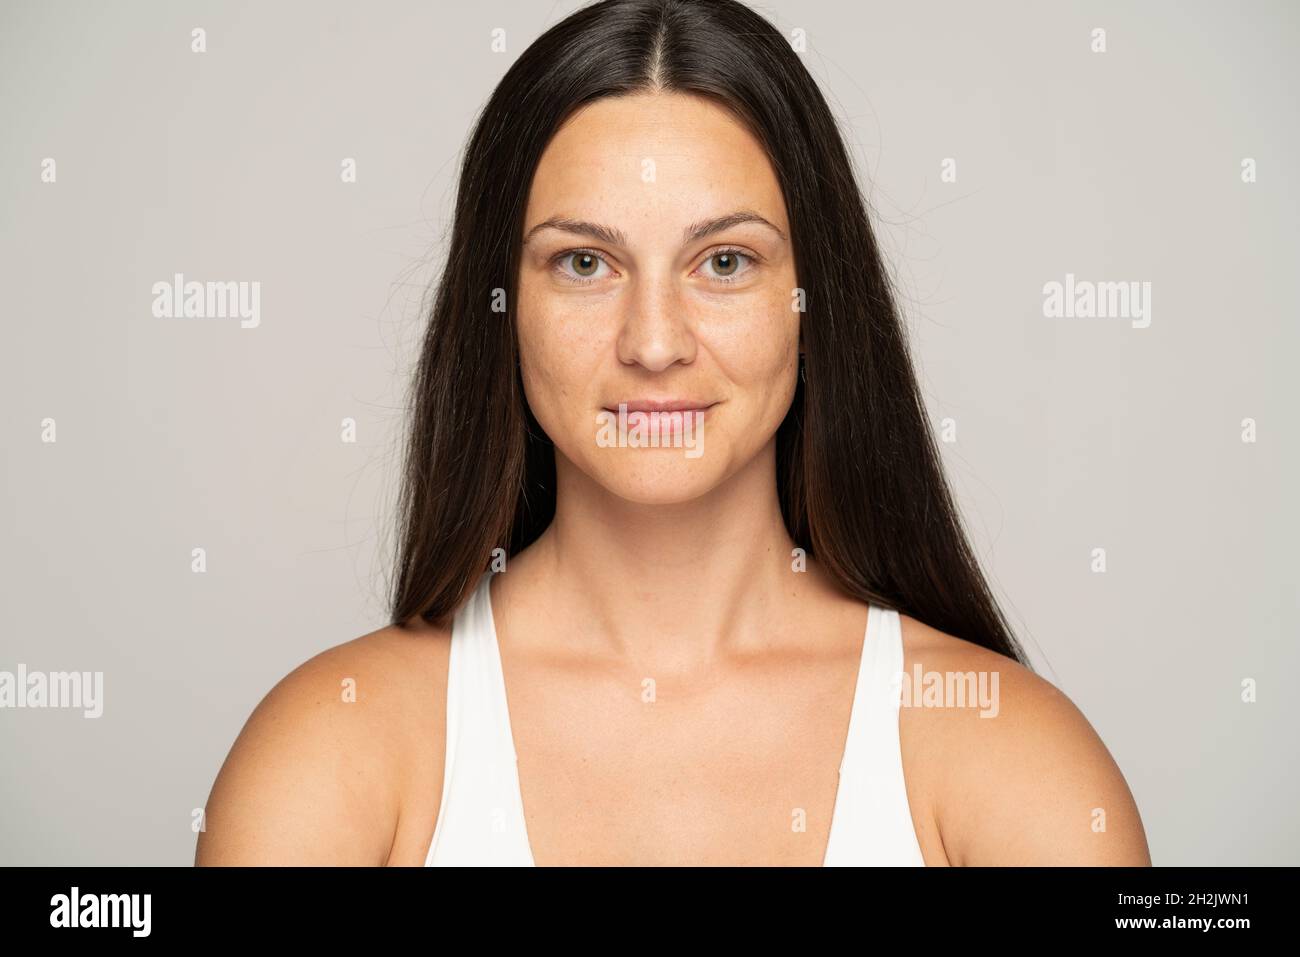 a young smiling woman without makeup with long hair on a gray background Stock Photo